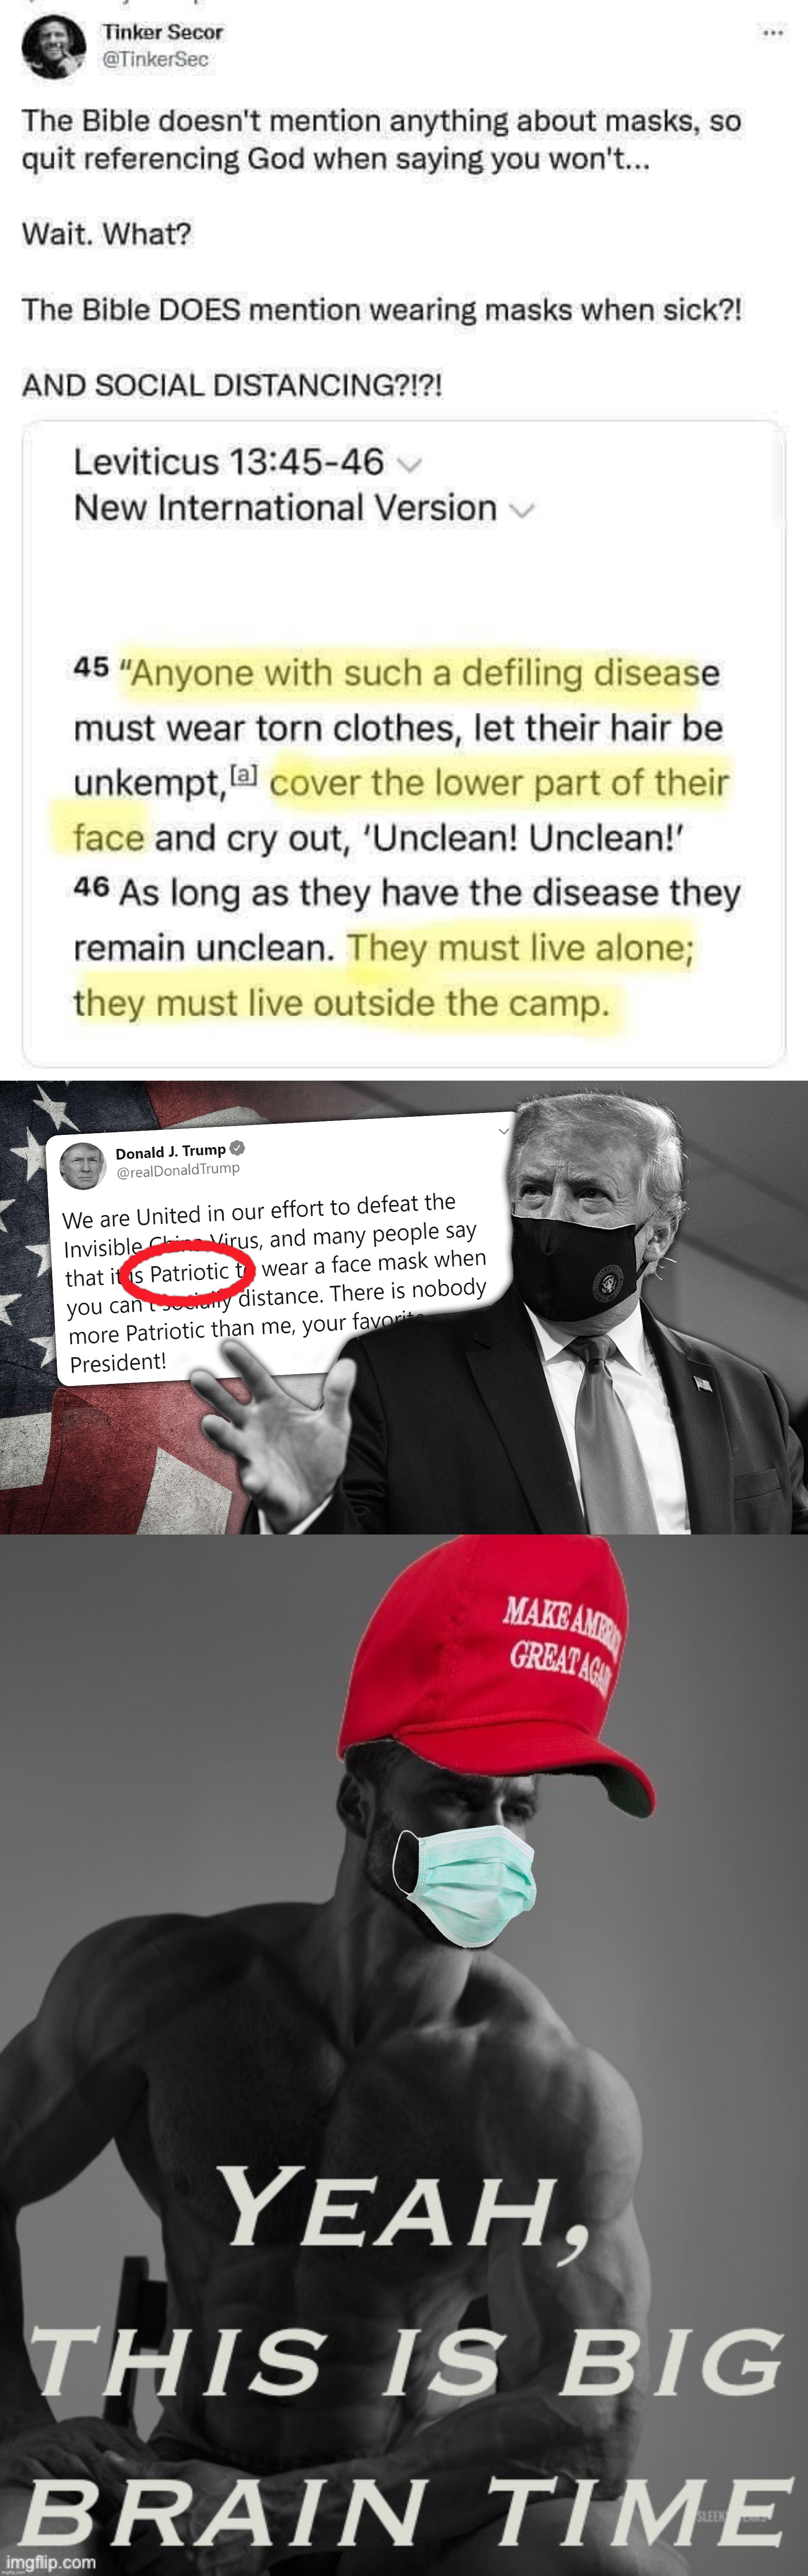 its patriotic & biblical to wear a mask so shut up libtrads we already do. | image tagged in social distancing in bible,trump face mask tweet patriotic,maga giga chad yeah this is big brain time,face mask,covid-19 | made w/ Imgflip meme maker